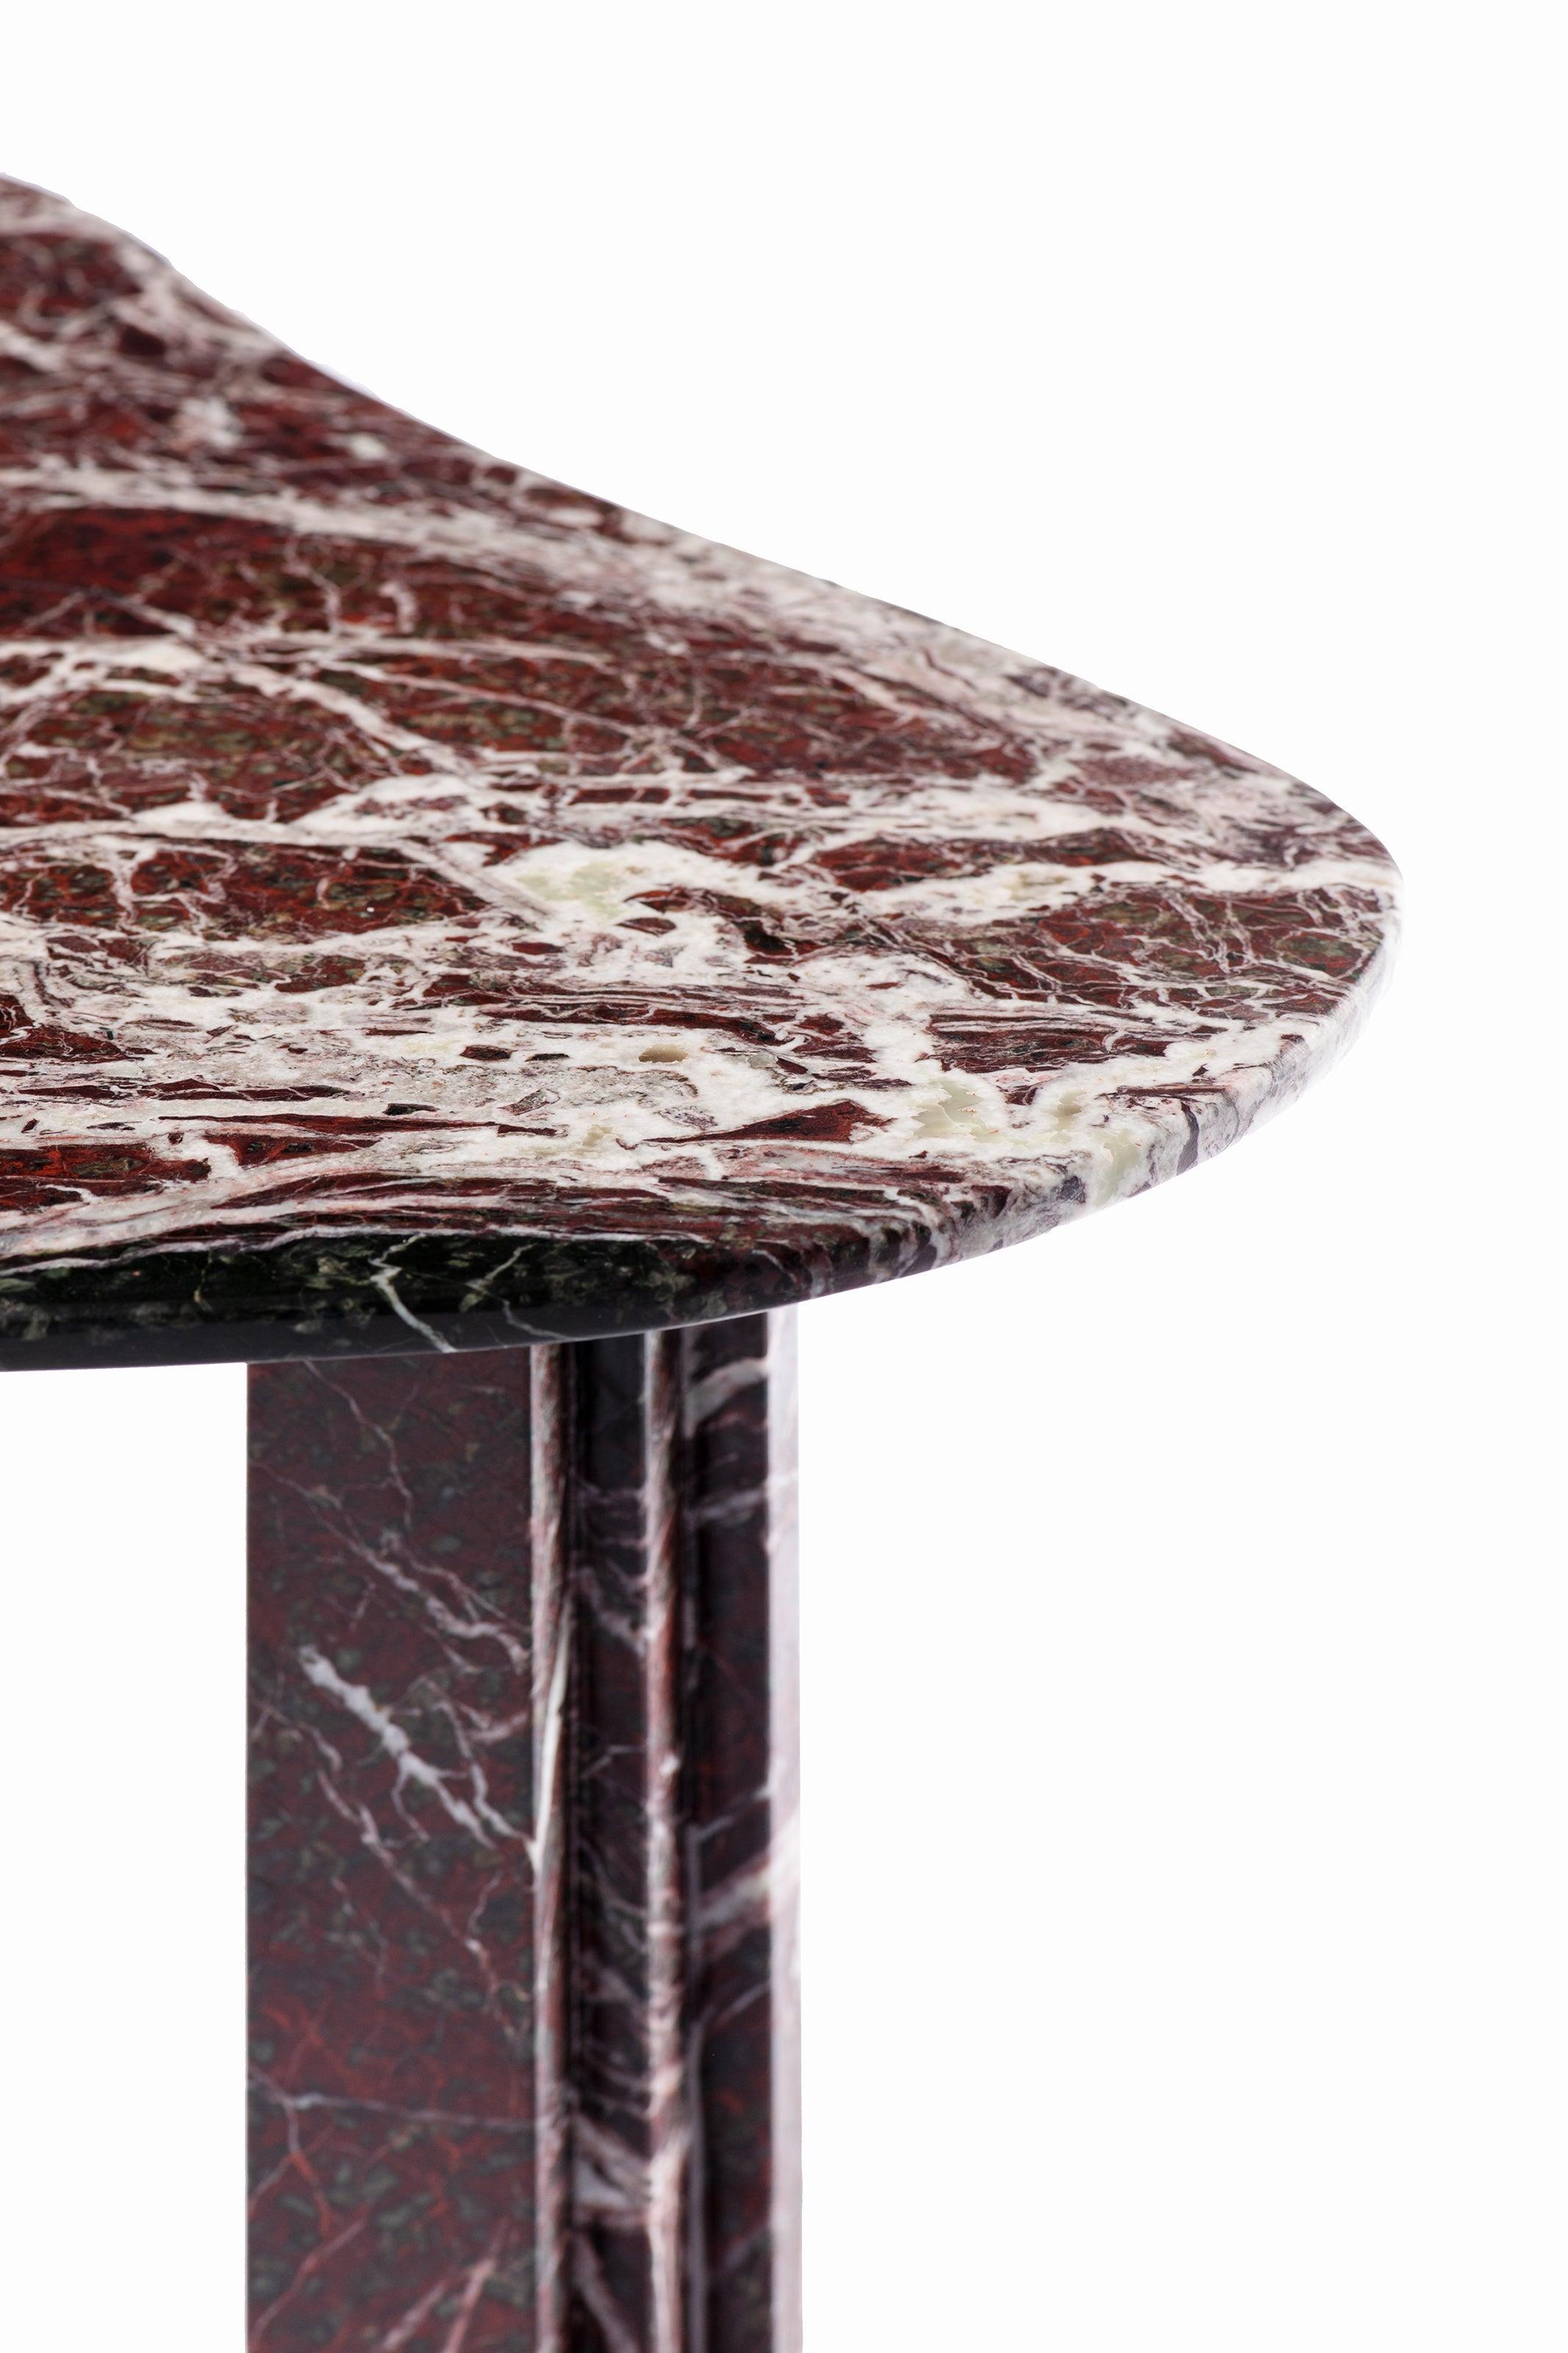 Organic Modern She Said Sculptural Red Marble Dining Table Signed by Lorenzo Bini